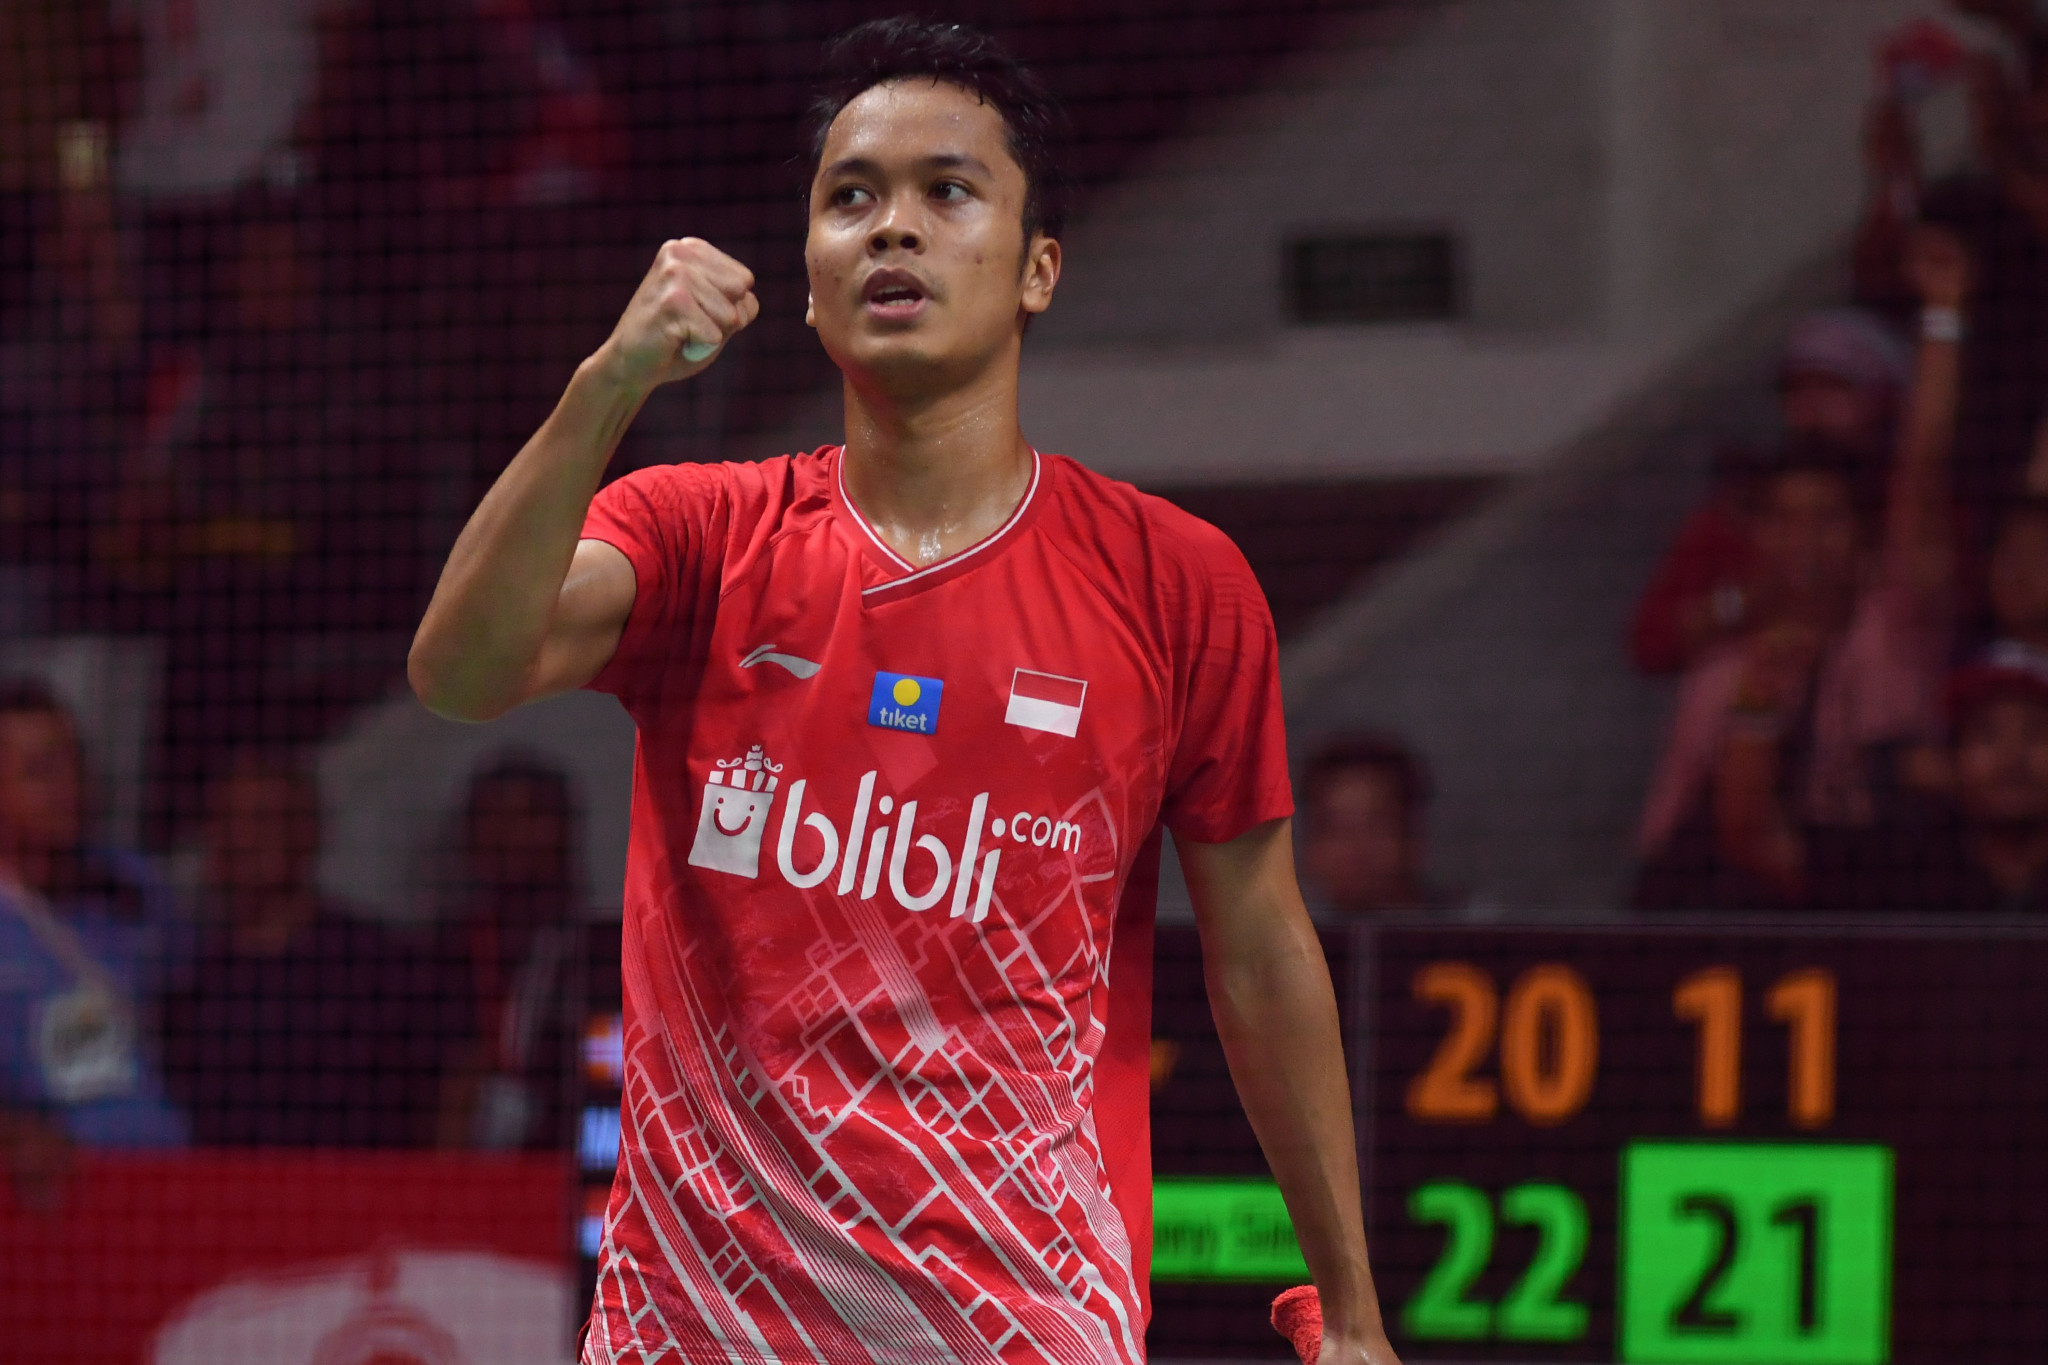 Home player Anthony Ginting celebrates reaching tomorrow's men's singles final ©Getty Images